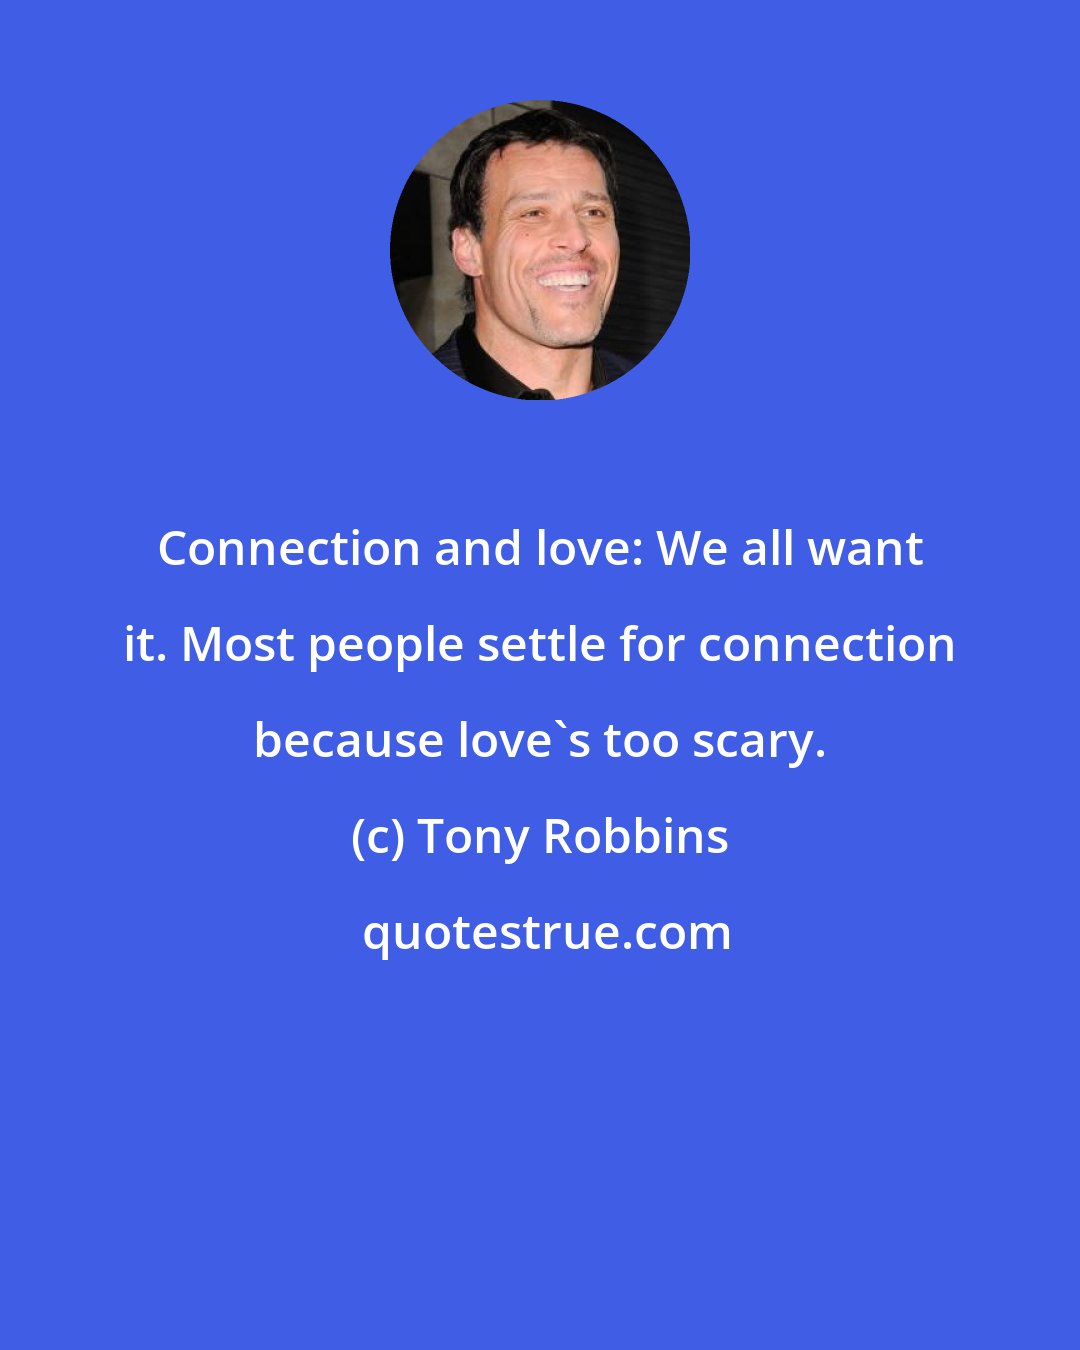 Tony Robbins: Connection and love: We all want it. Most people settle for connection because love's too scary.